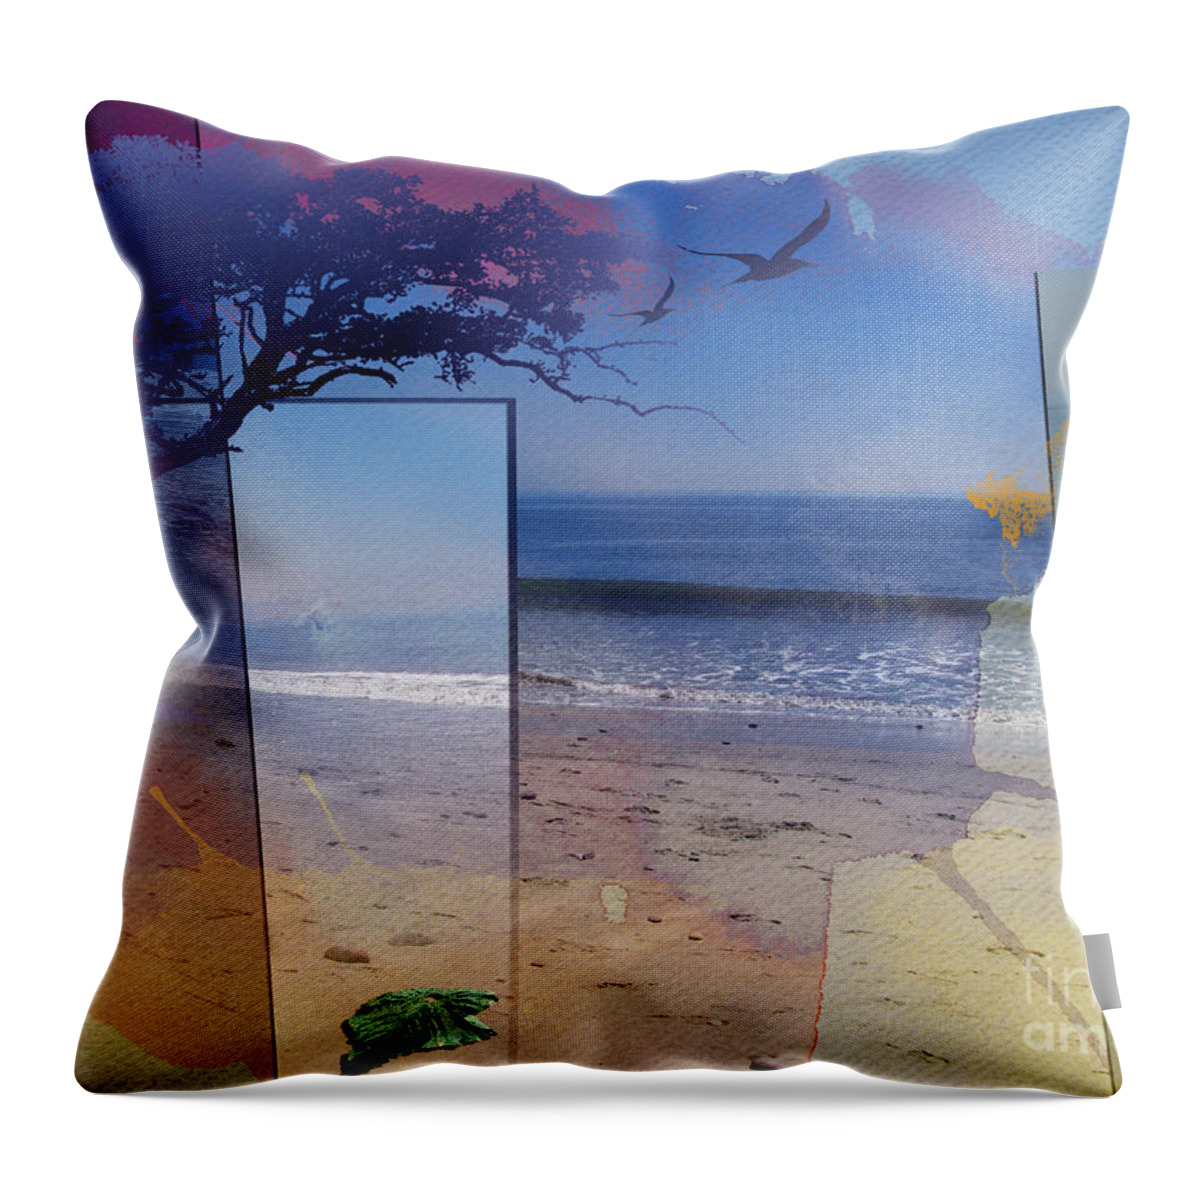 Abstract Throw Pillow featuring the digital art The Abstract Beach by Peter Awax